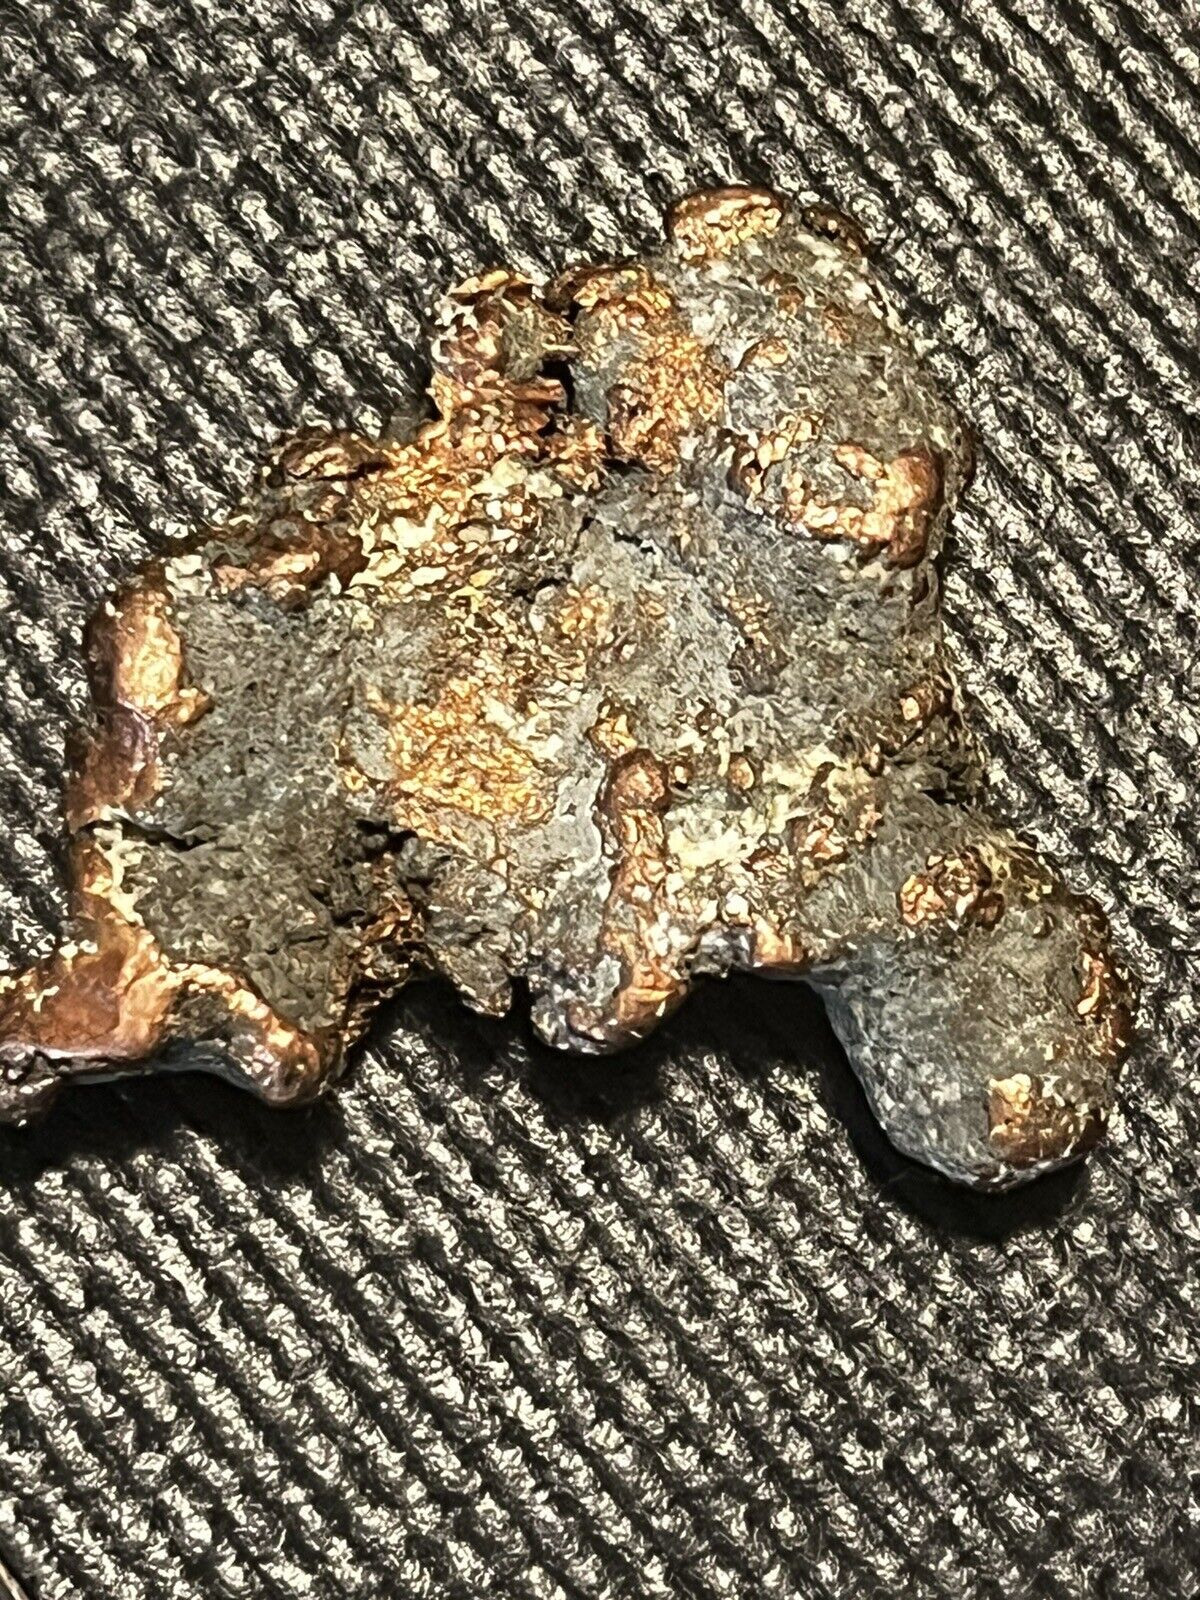 ALASKAN GOLD &COPPER Cluster 1.42lbs🔥.FROM THE FAMOUS COPPER RIVER In SC AK